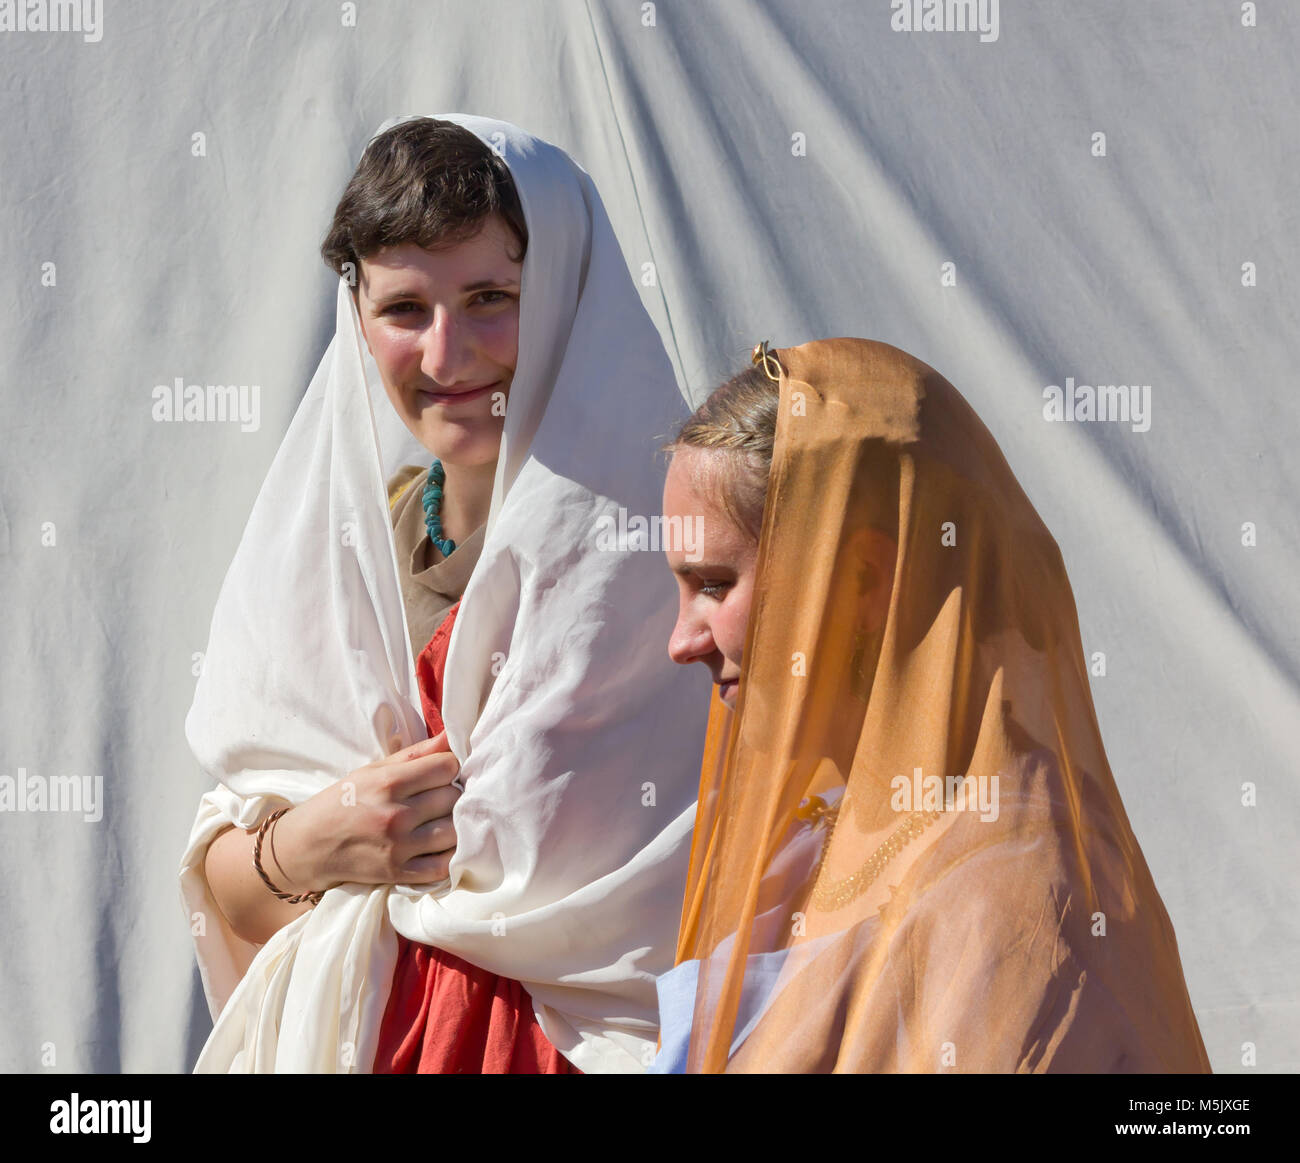 AQUILEIA, Italy - June 18, 2017 : Close-up on two young girls wearing stage costume at the annual local ancient Roman historical reenactment Stock Photo